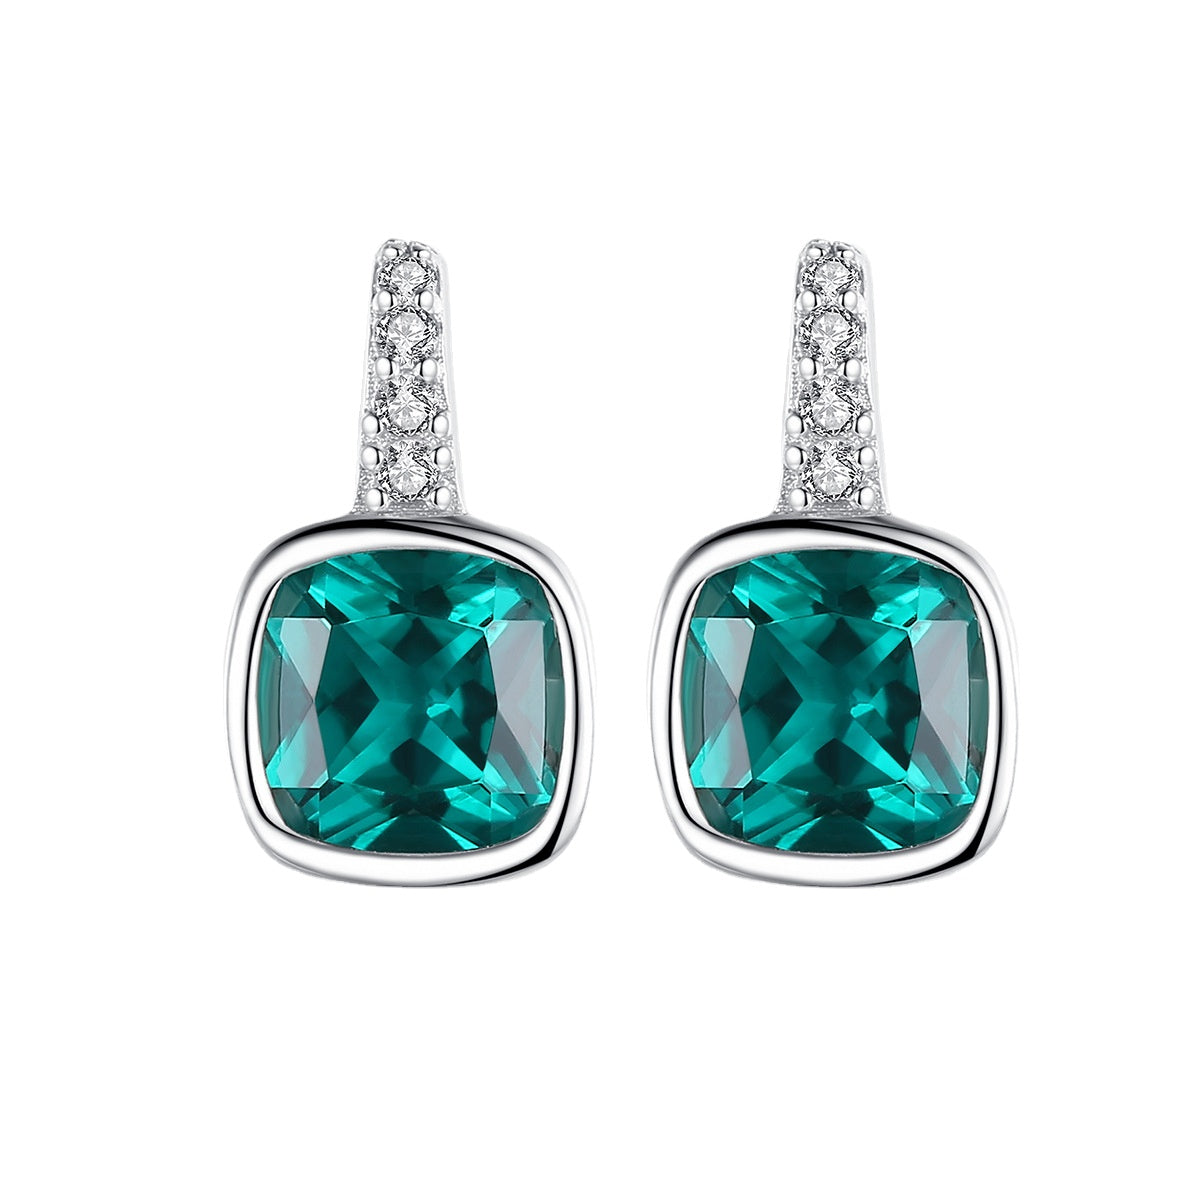 Gemstonely- S925 Silver Stud Earrings with Simple Square Imitation Emerald